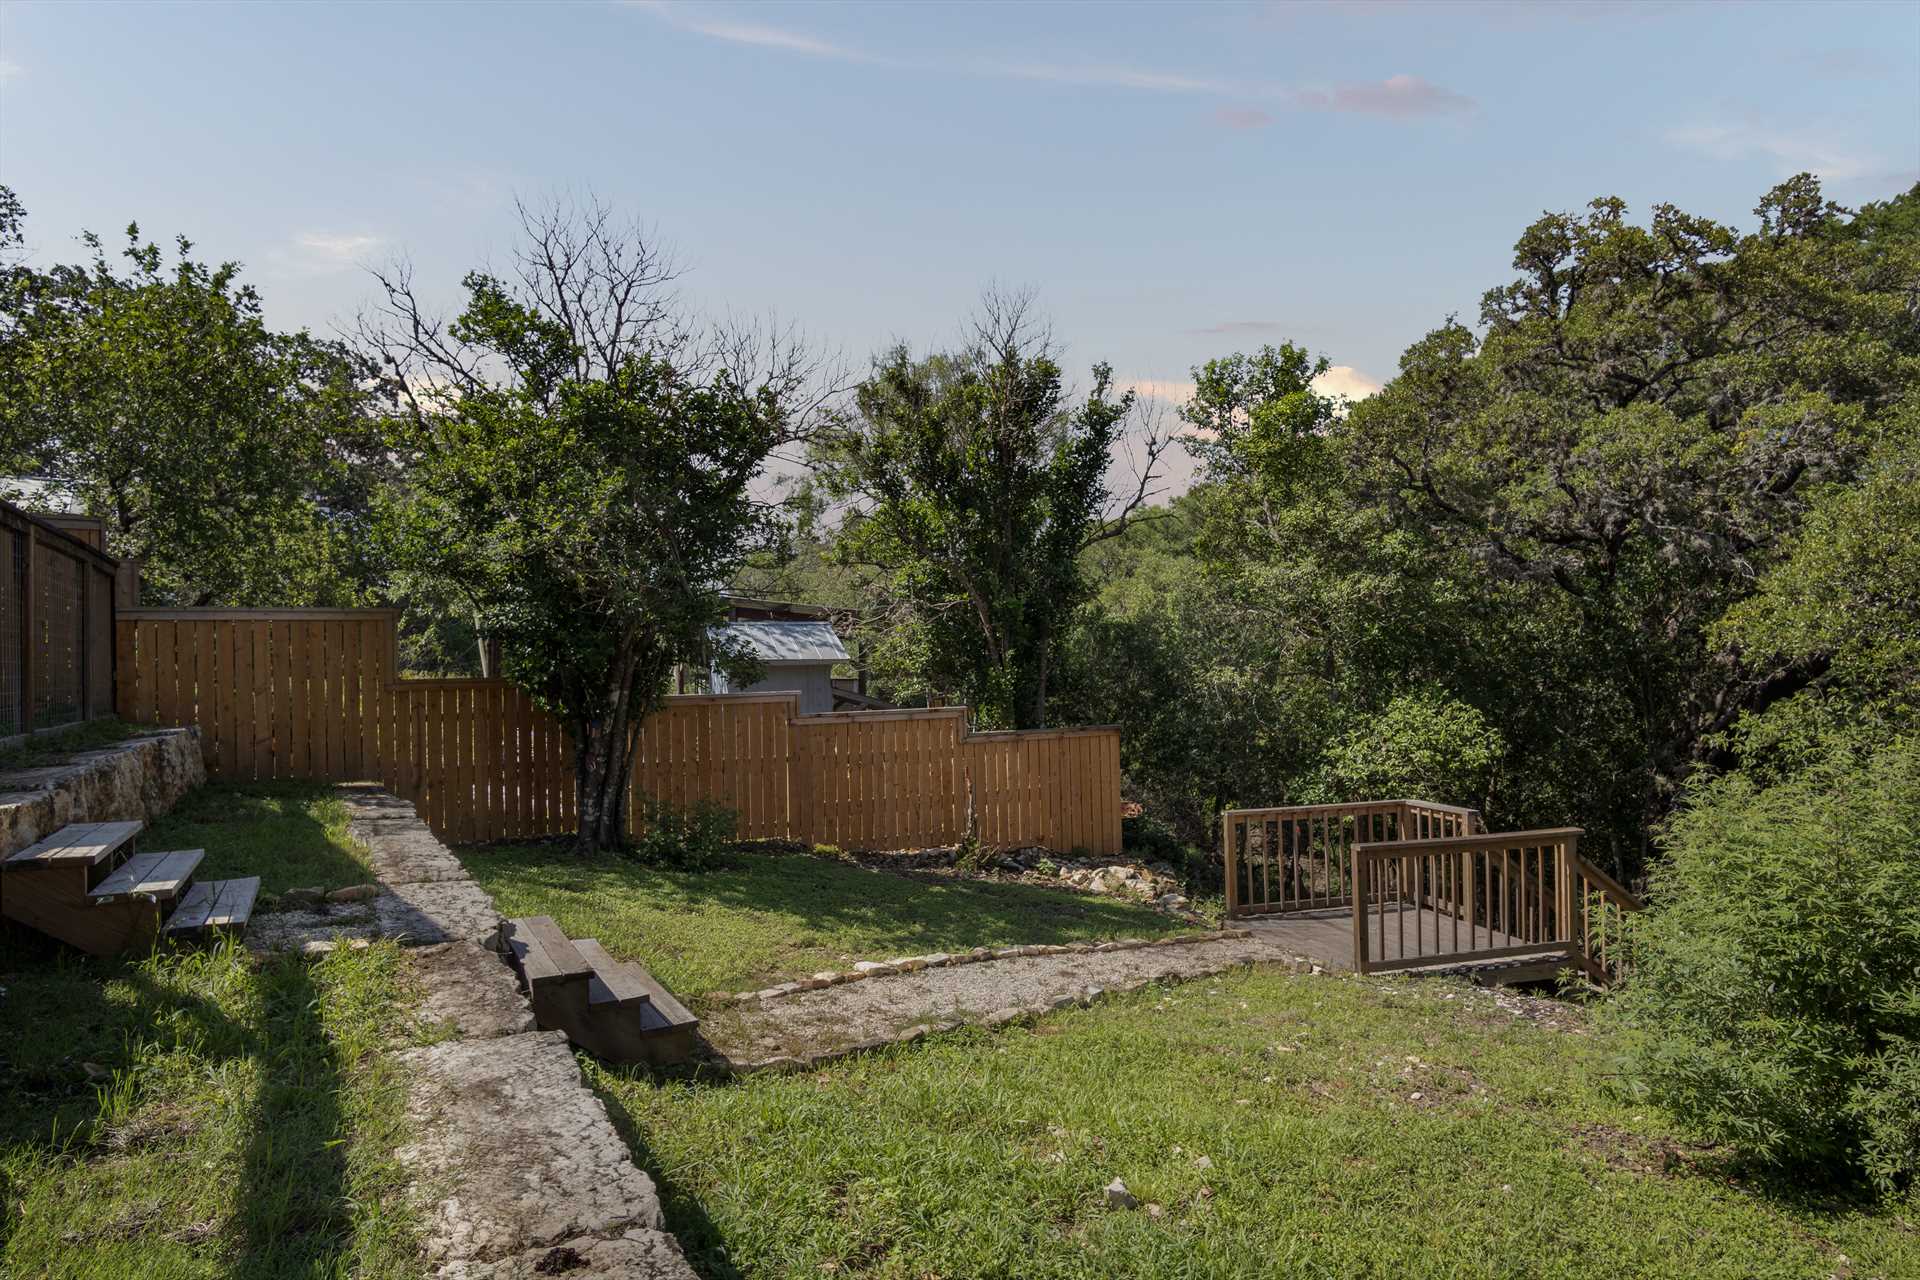                                                 A staircase has been conveniently built for access to the Medina River from the house.